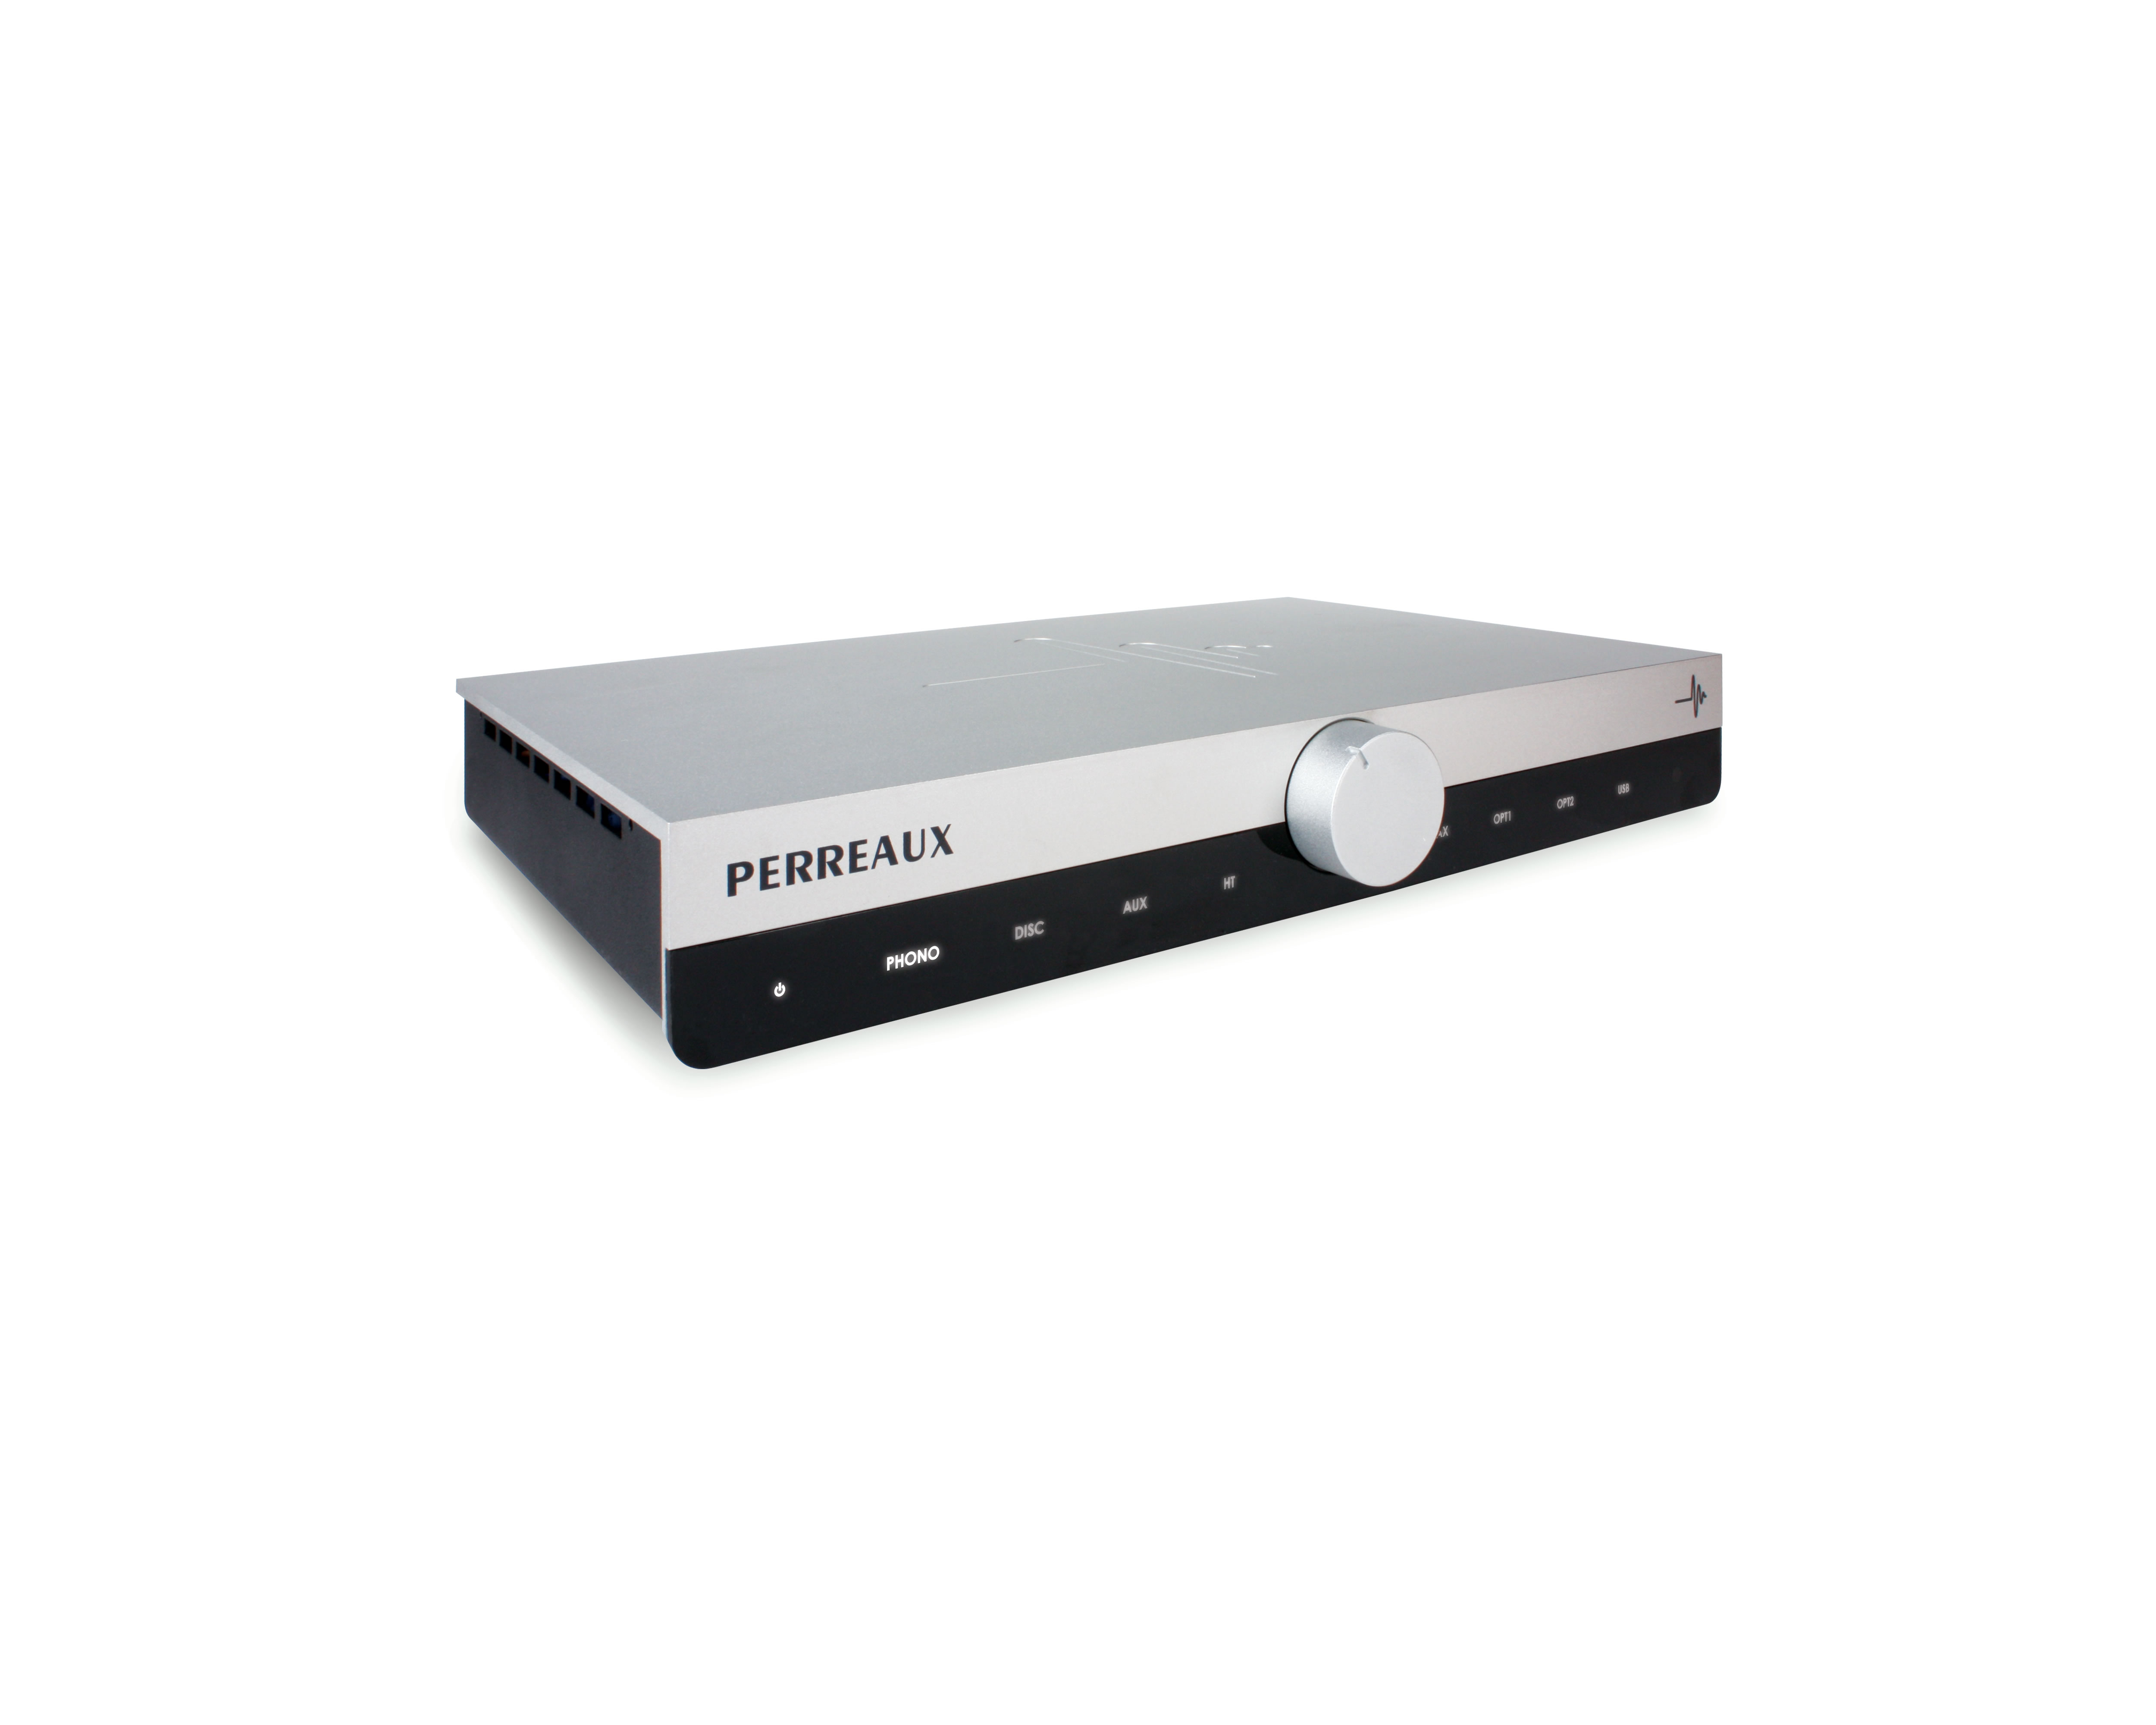 Perreaux Audiant 80i silver